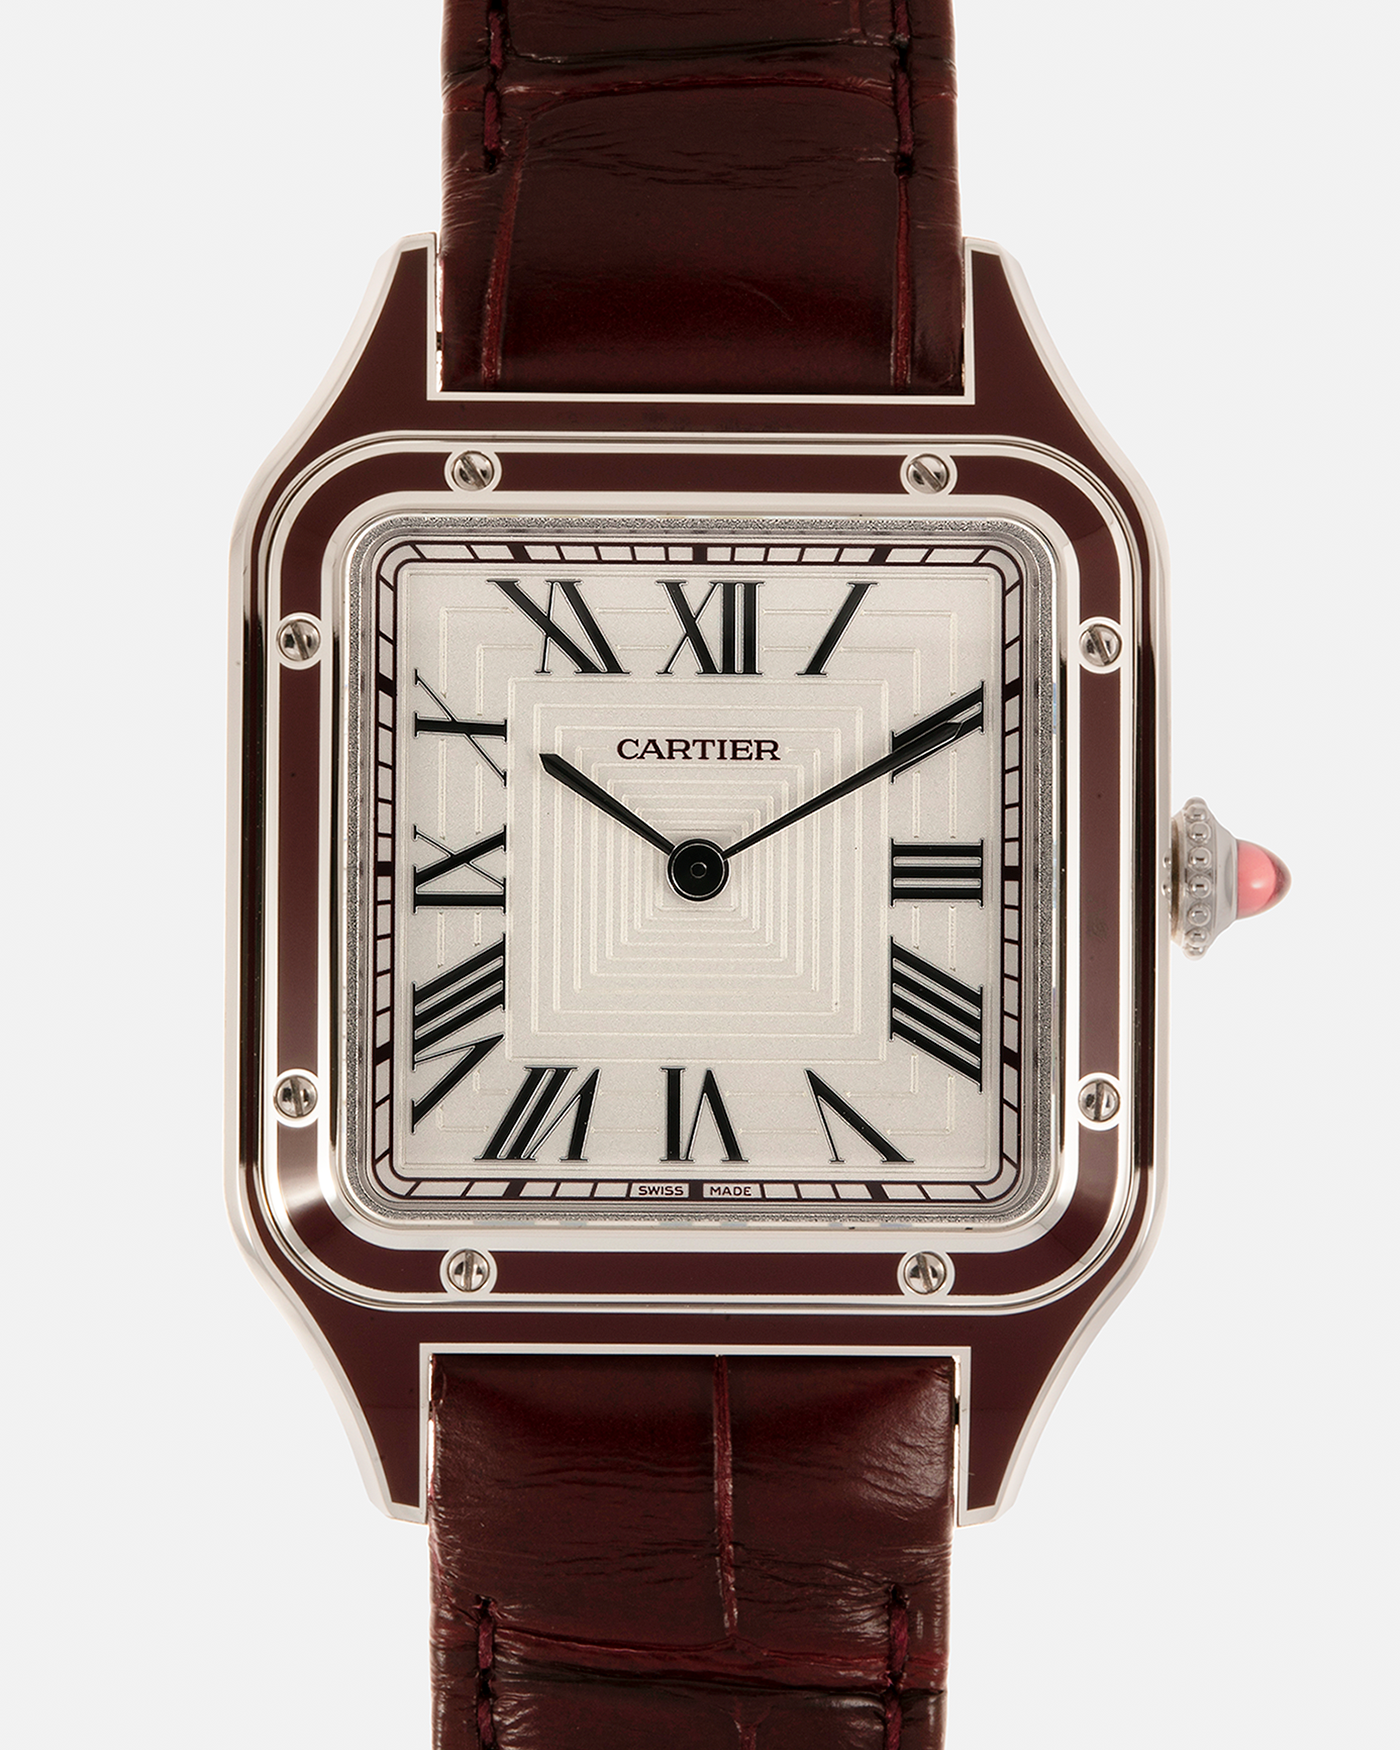 Brand: Cartier Year: 2022 Model: Santos-Dumont Large, Limited Edition of 150 pieces Reference Number: WGSA0053 Material: Platinum 950 Case, Burgundy Lacquered Bezel Movement: Cartier Cal. 430 MC, Manual-Winding Case Diameter: 43.5mm x 31.4mm Strap: Cartier Burgundy Alligator Leather Strap with Signed Platinum 950 Tang Buckle